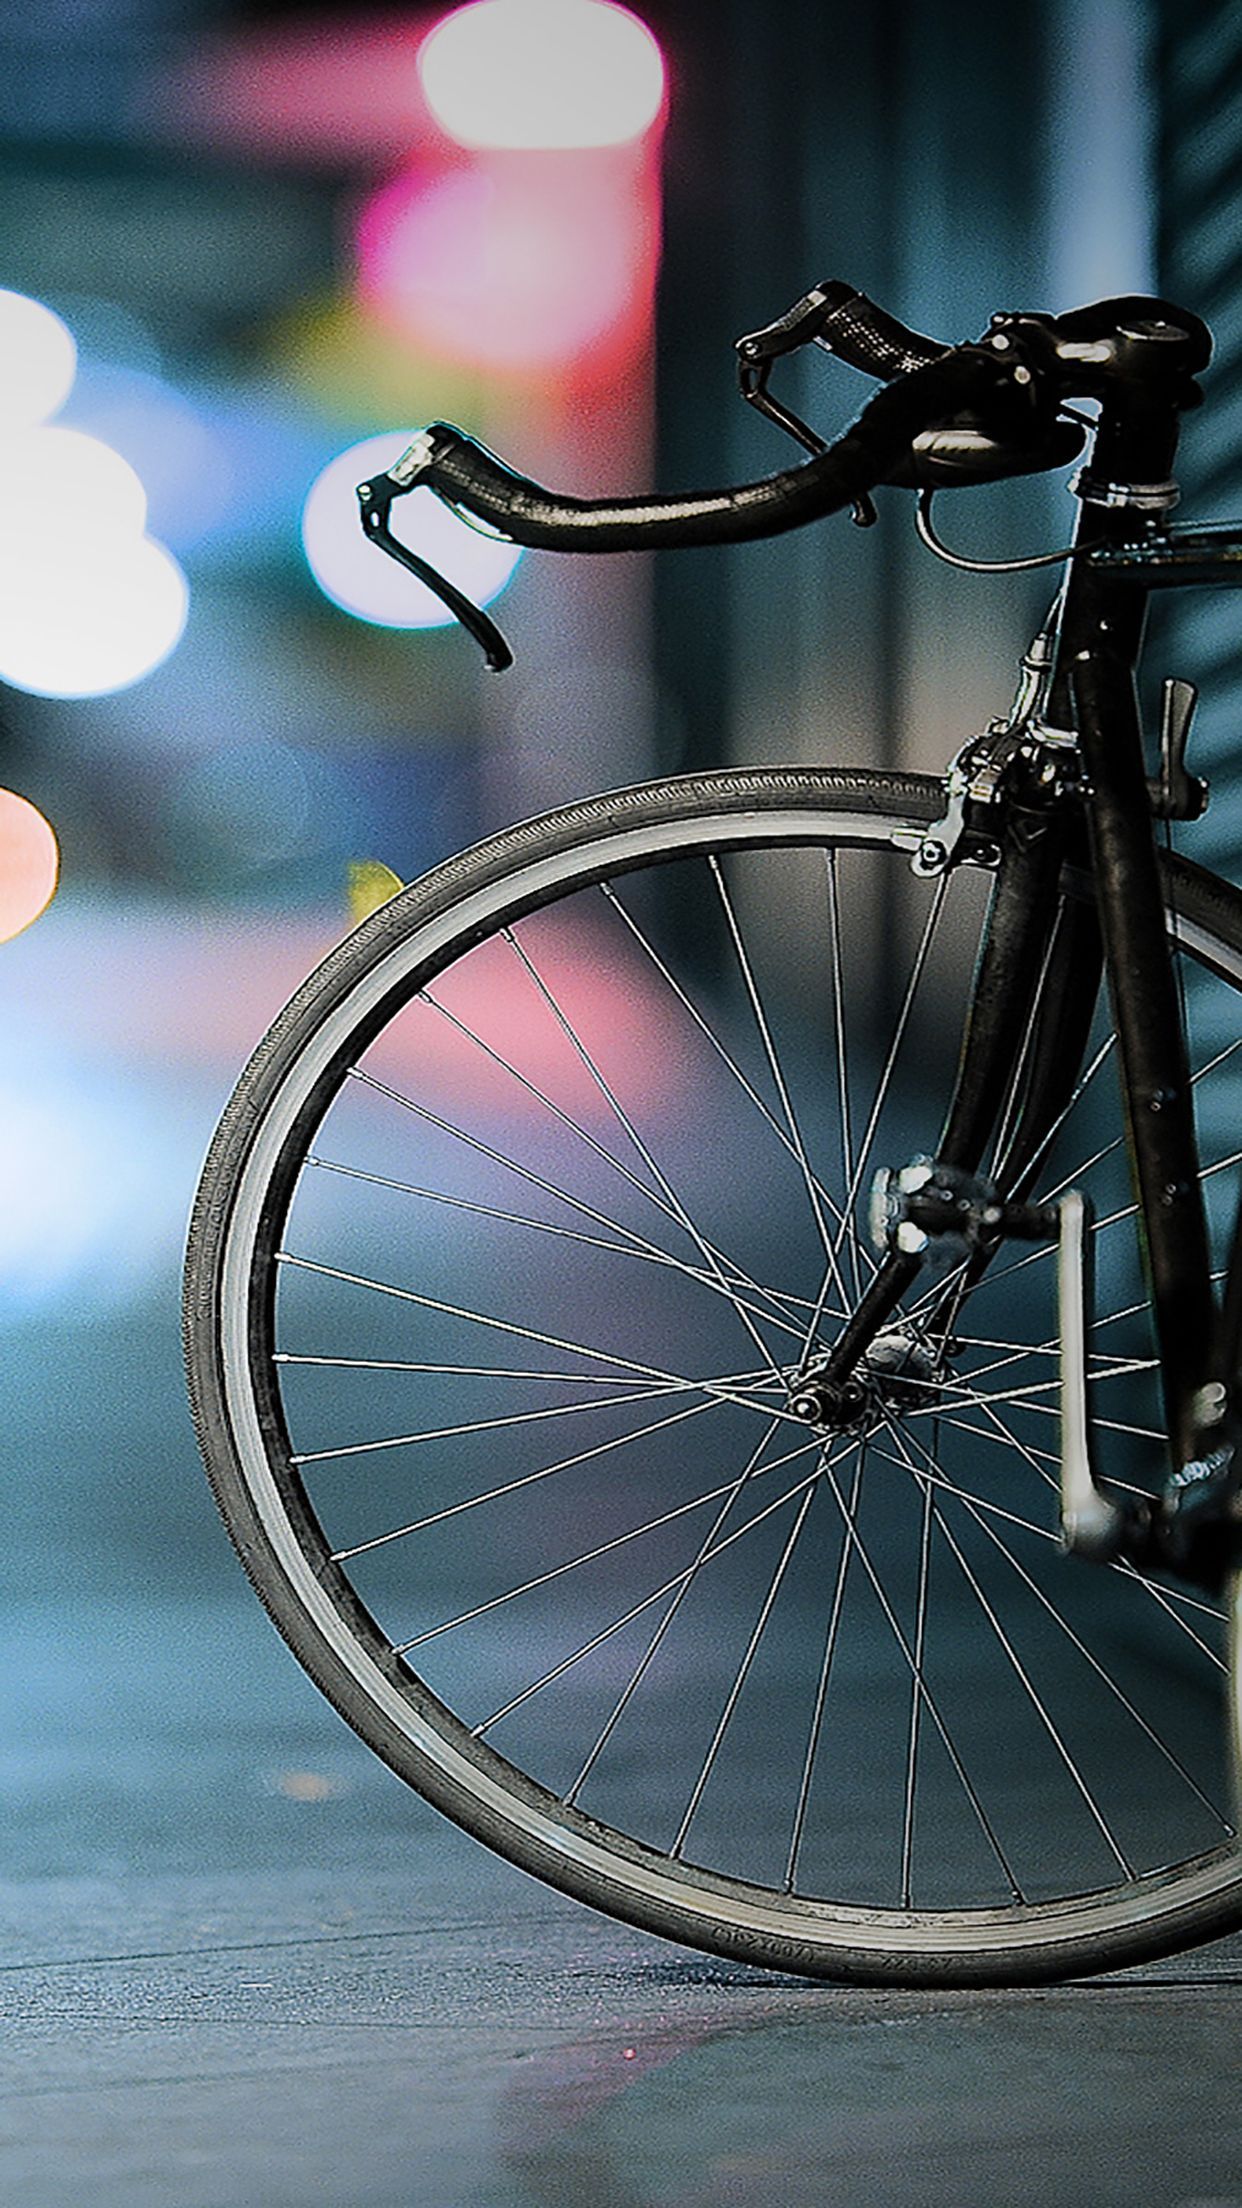 Bicycle Iphone Wallpapers 4k Hd Bicycle Iphone Backgrounds On Wallpaperbat